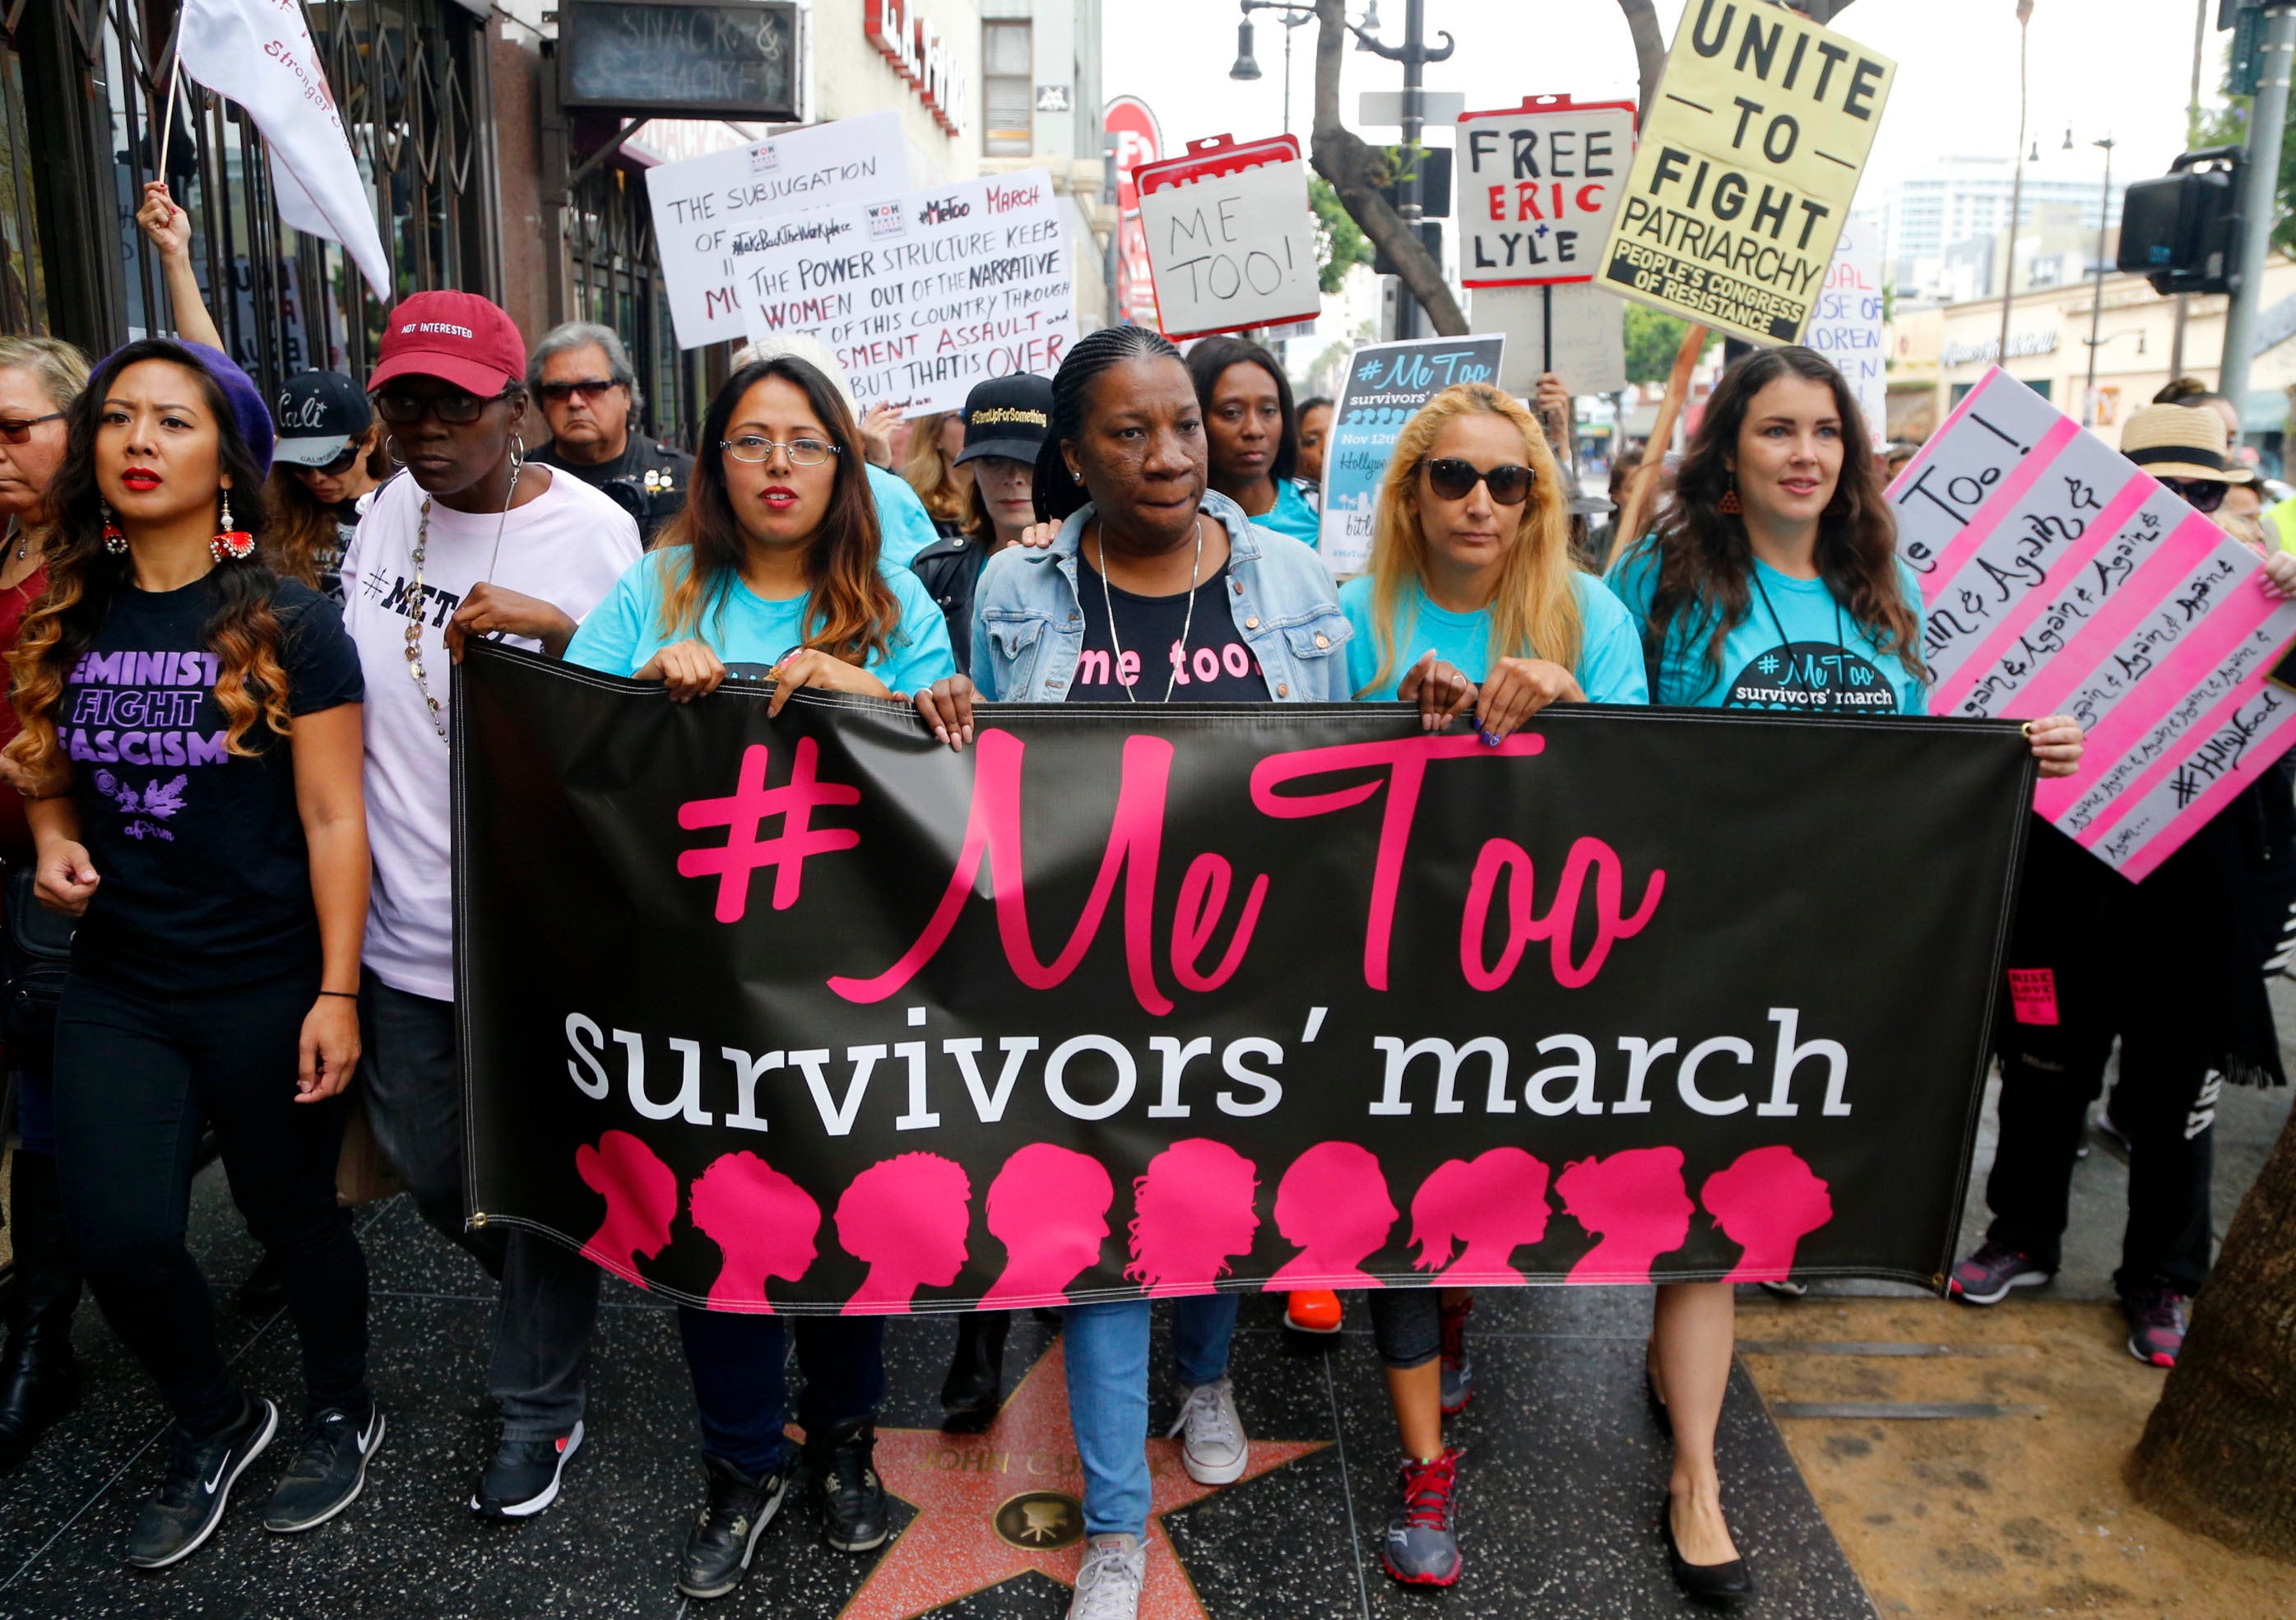 Tarana Burke, founder and leader of the MeToo movement, marches with others at a rally in Hollywood